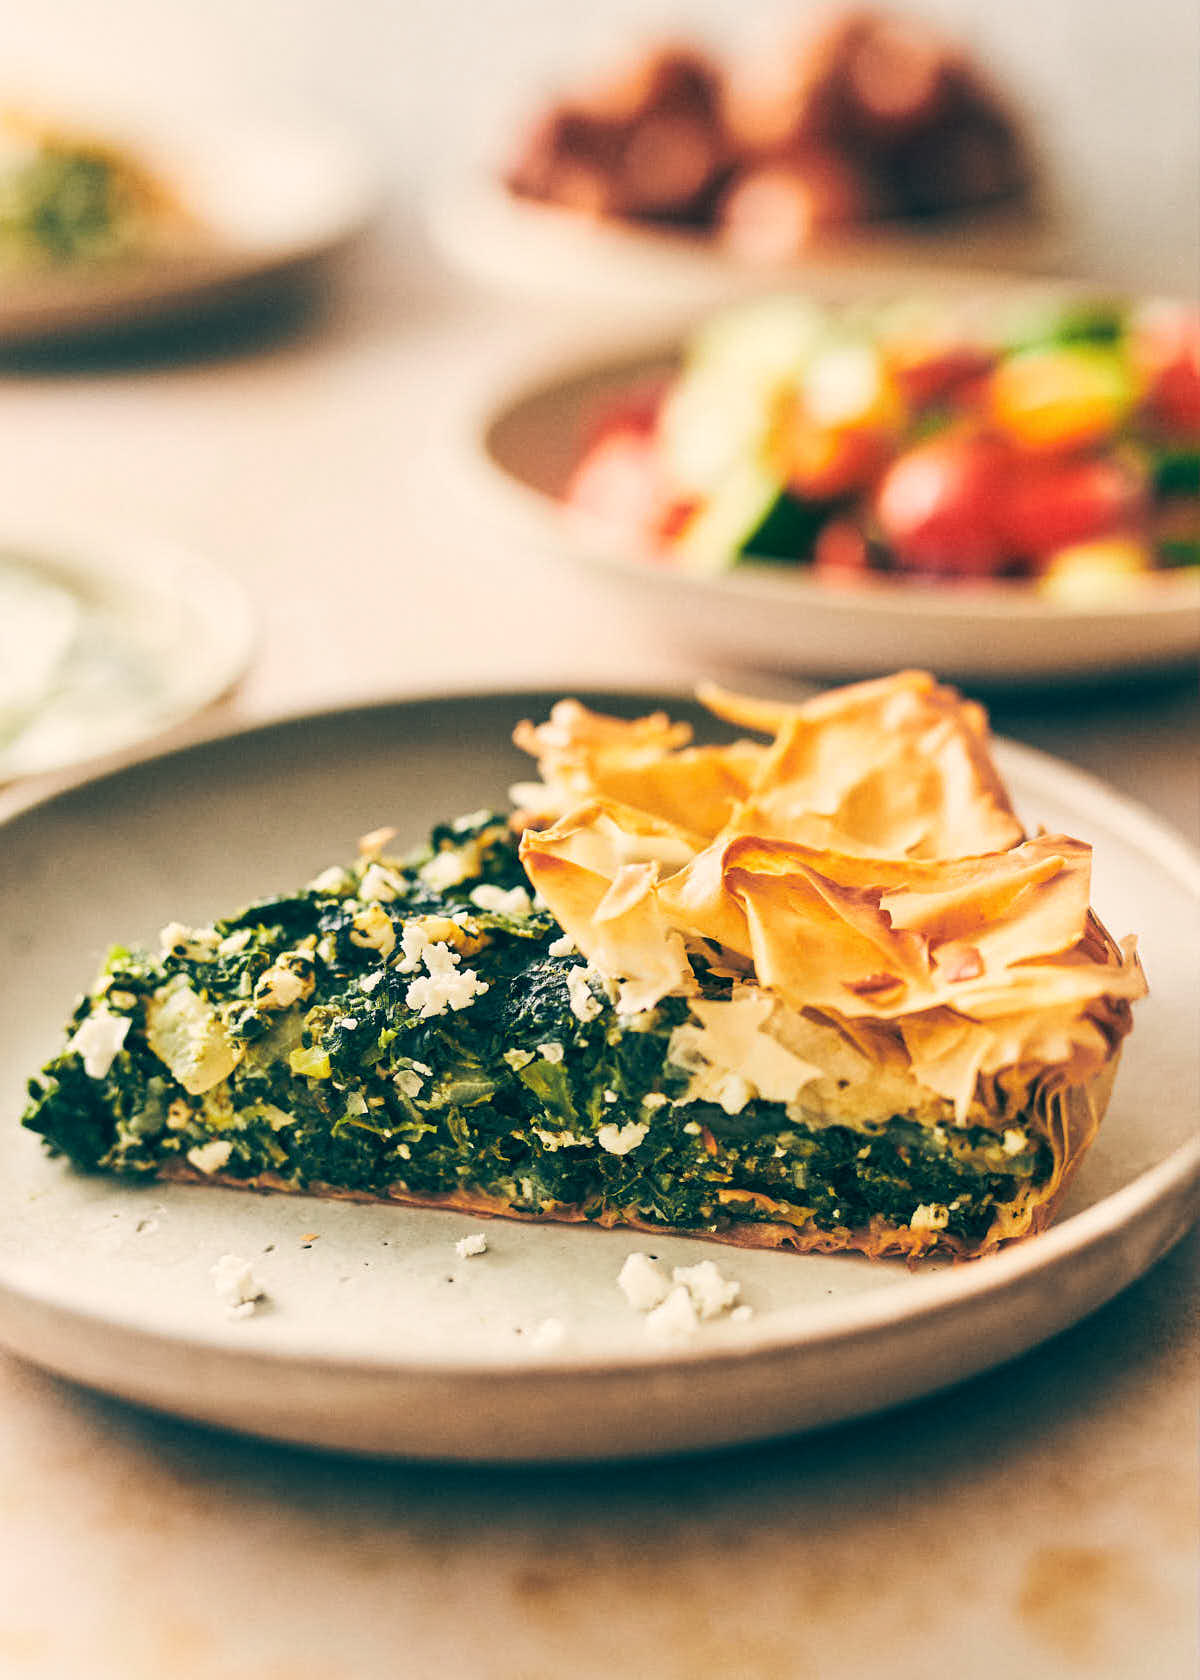 Slice of spanakopita on a plate with greek salad in the background